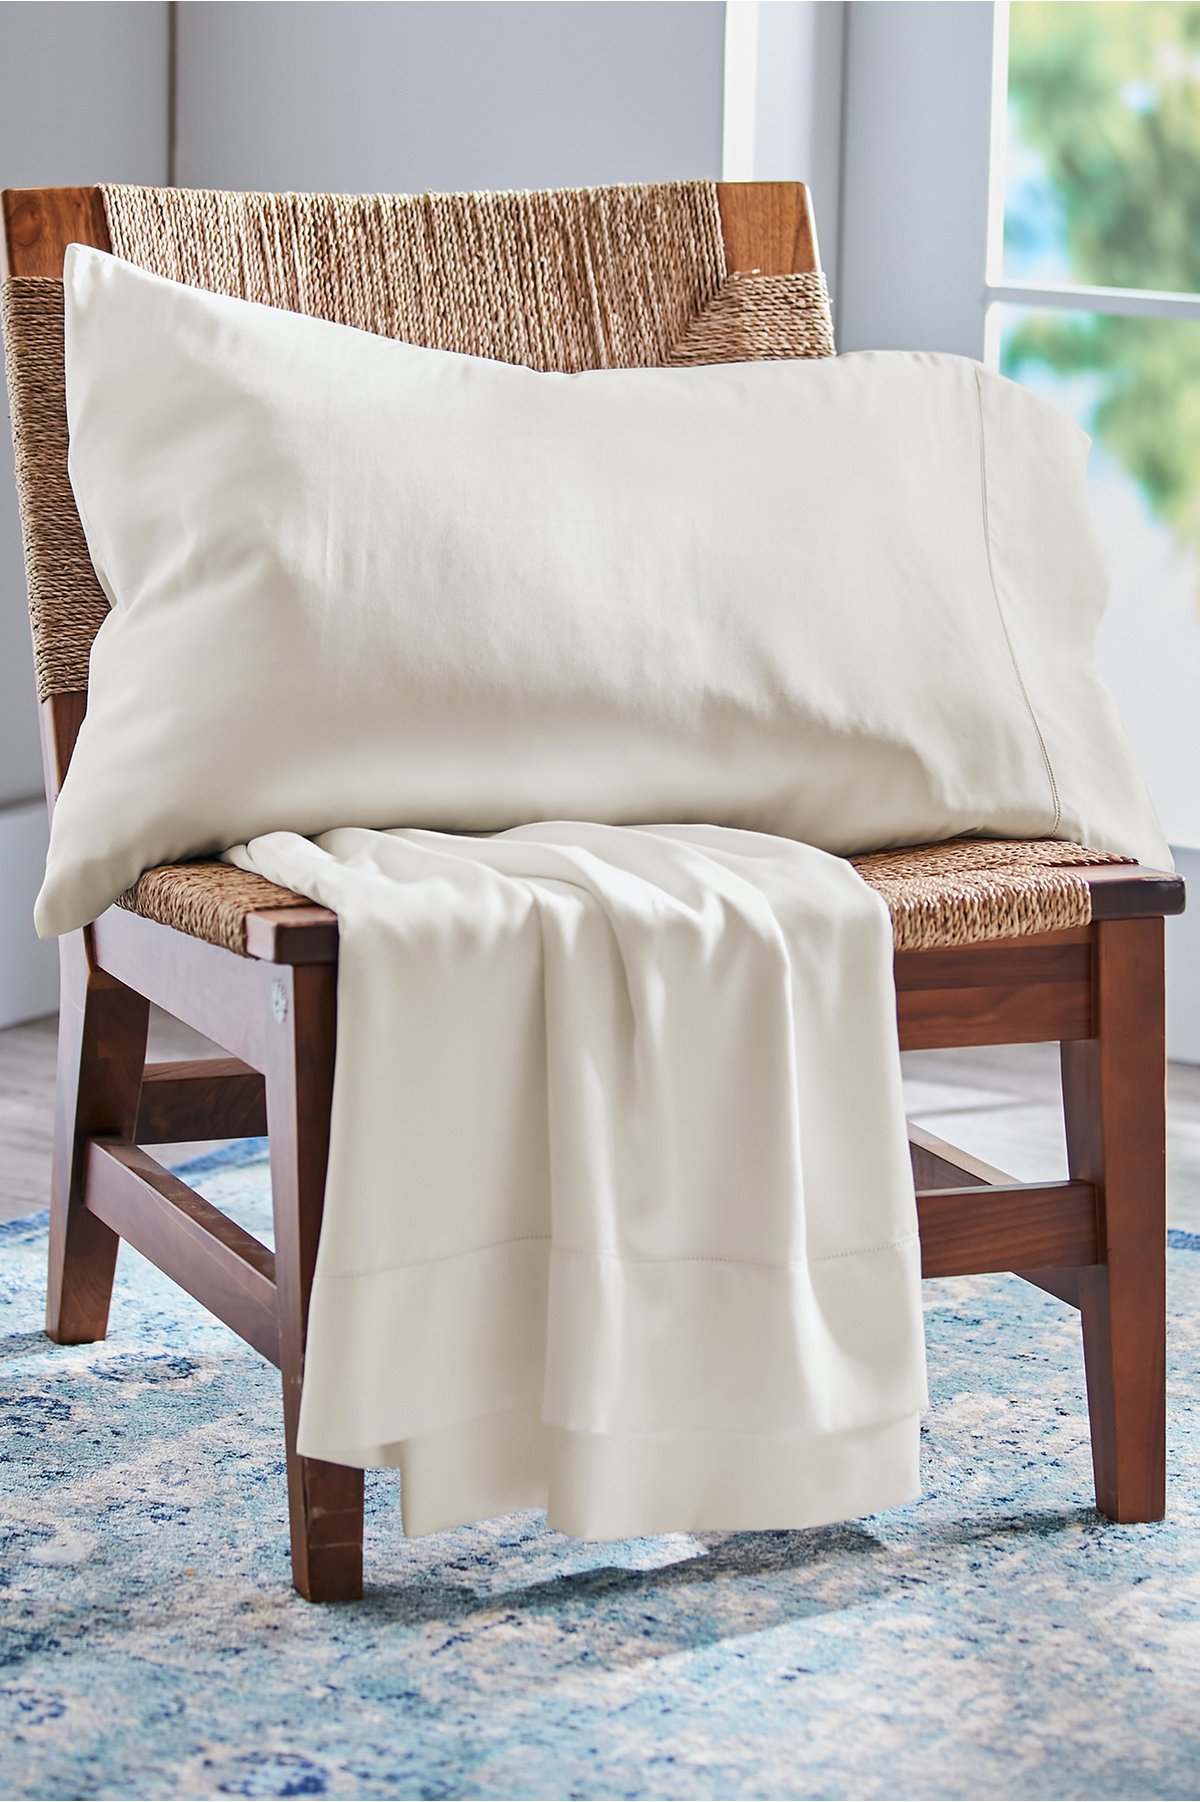 Blissful Bamboo Sheet Set by Soft Surroundings, in Ivory size King